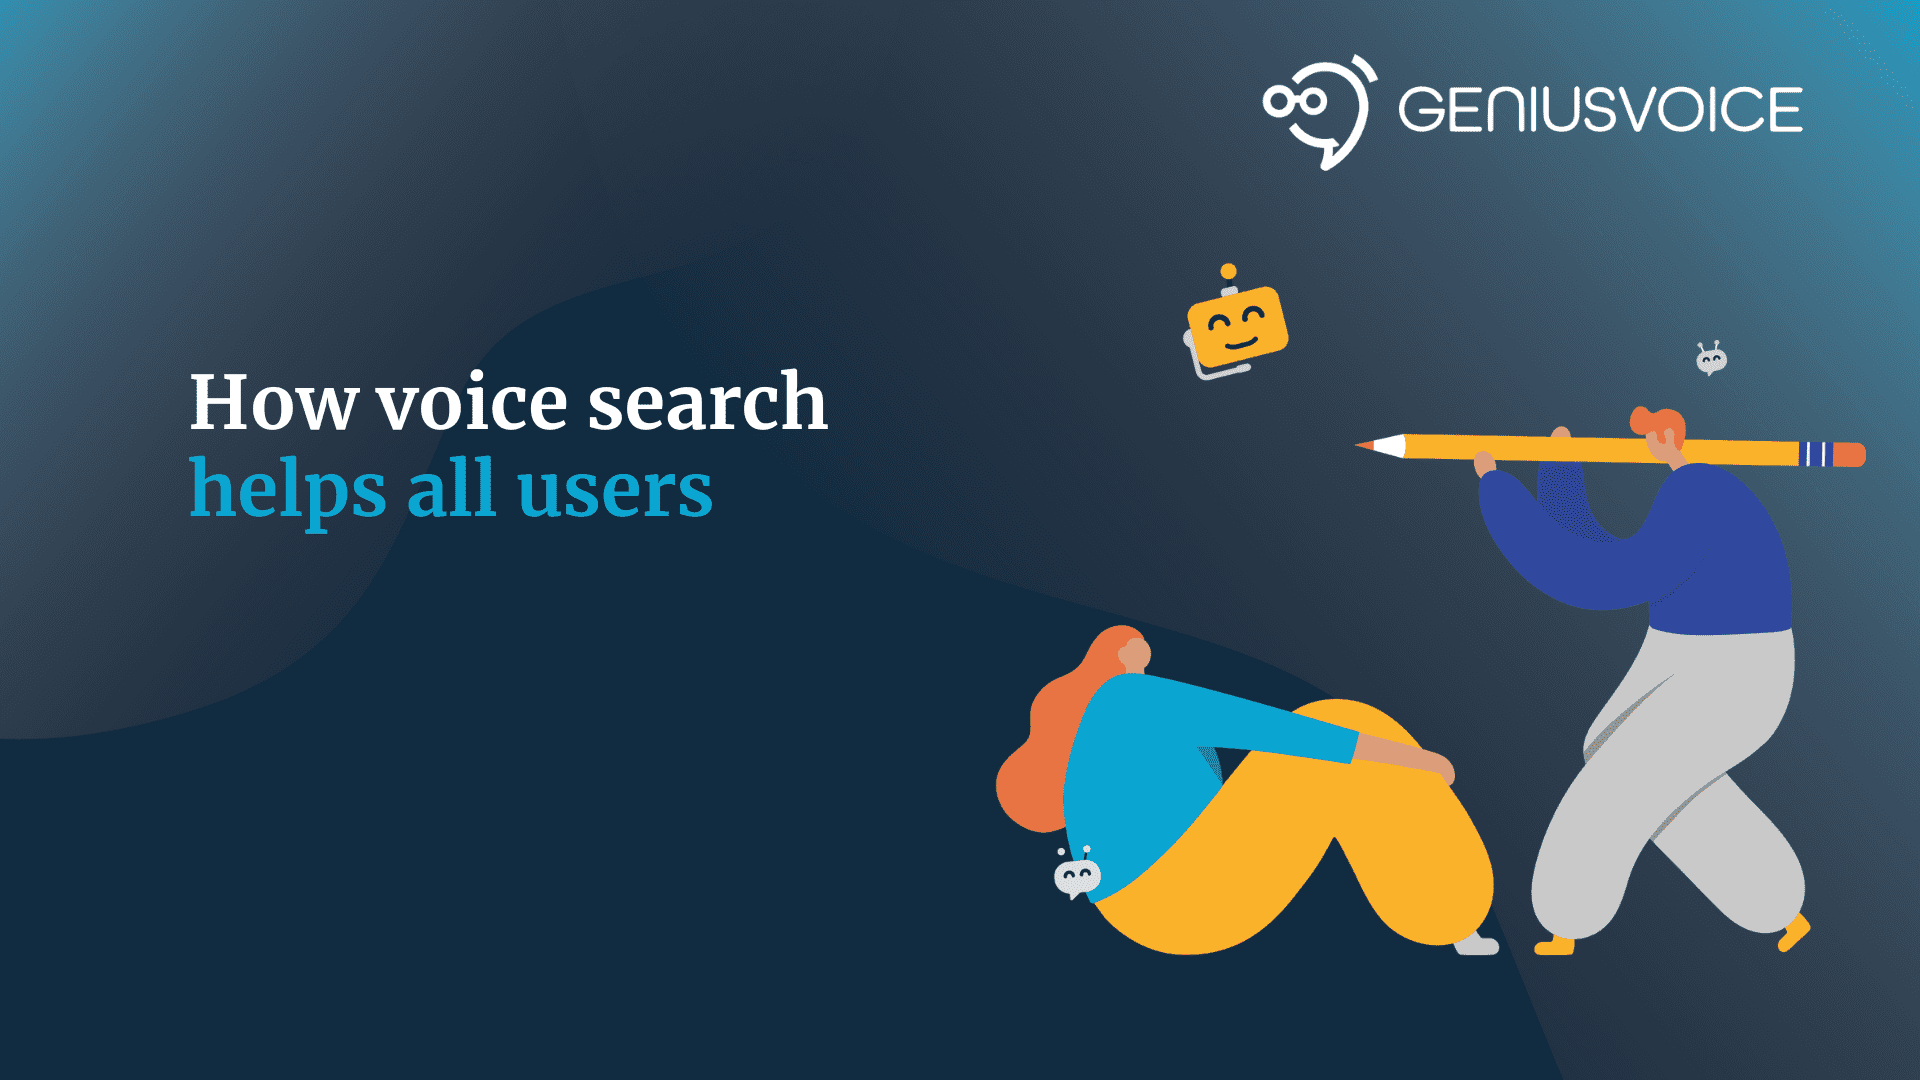 How voice search helps all users